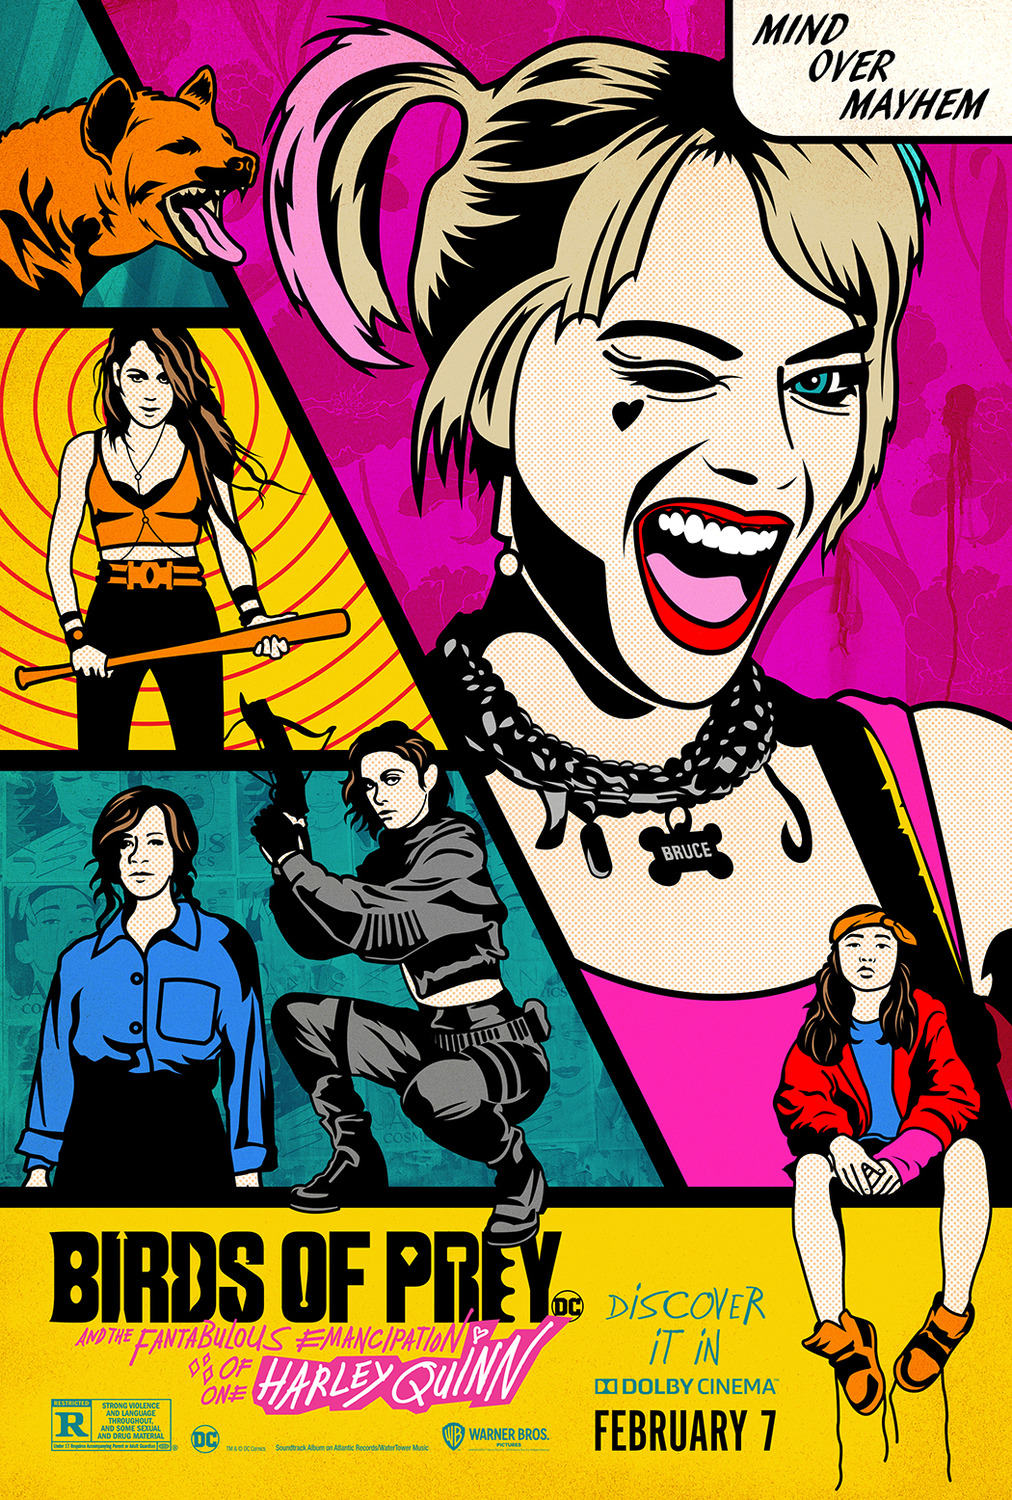 Extra Large Movie Poster Image for Birds of Prey (And the Fantabulous Emancipation of One Harley Quinn) (#18 of 18)